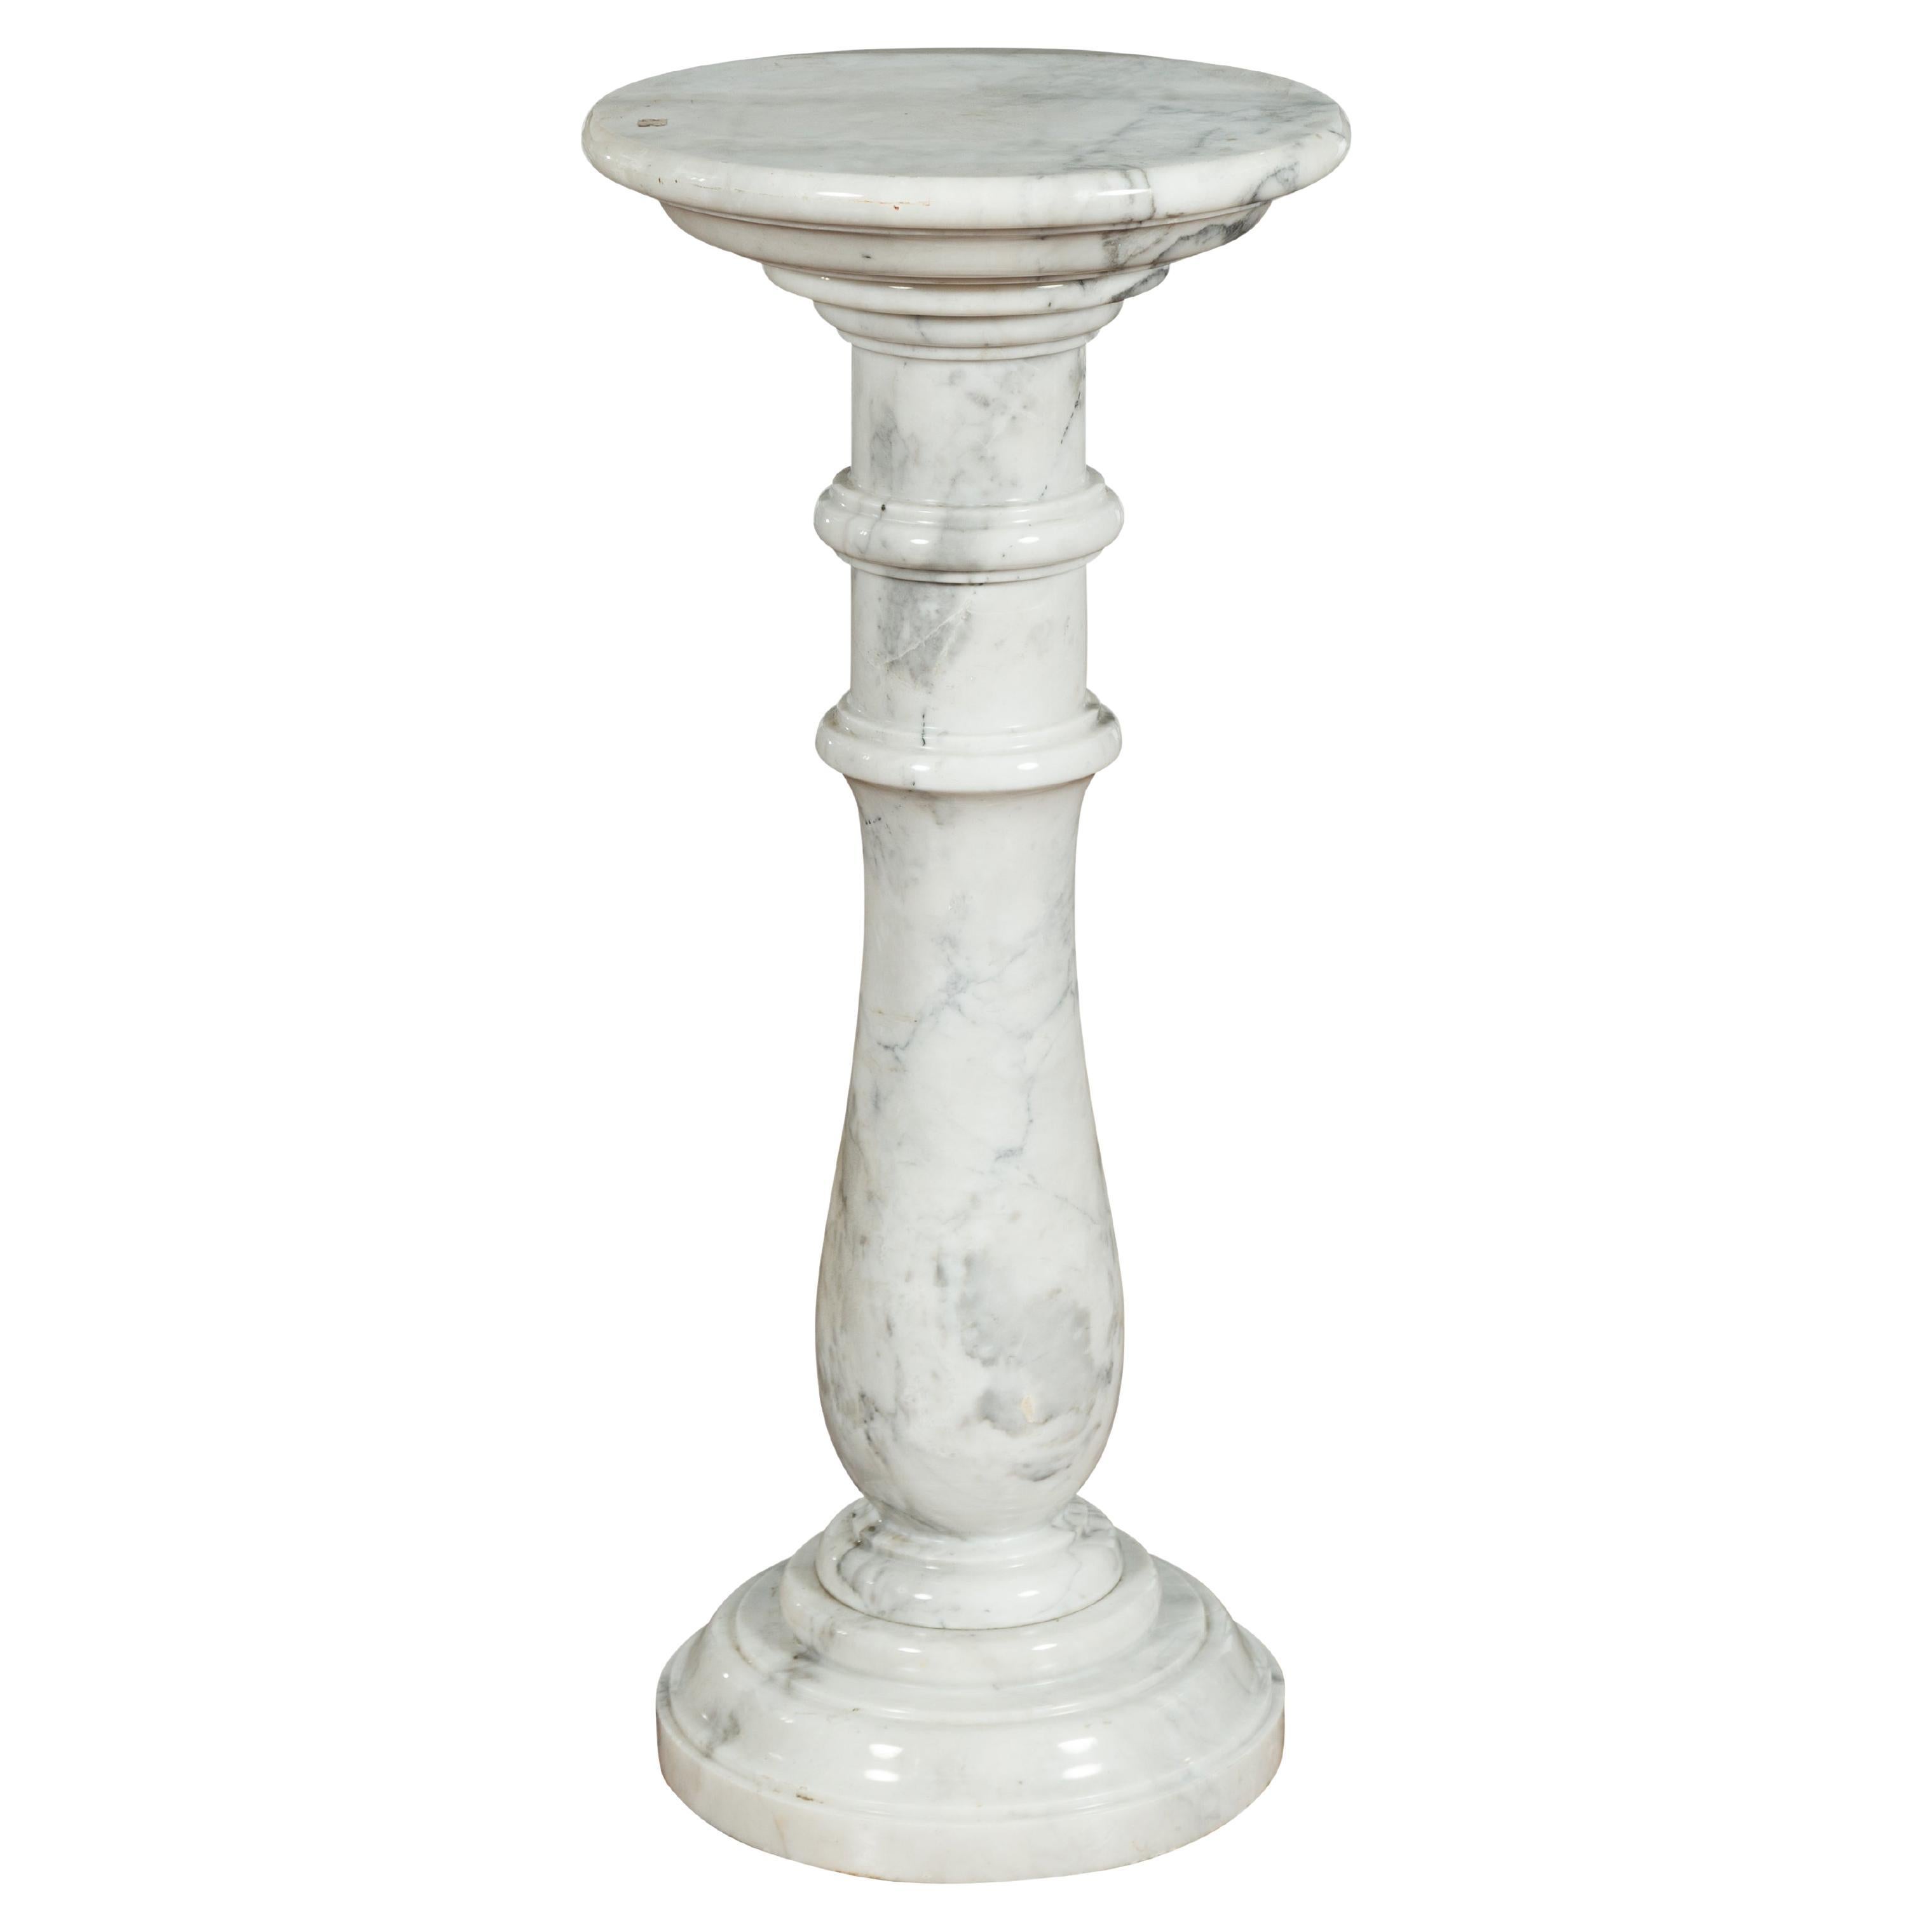 Vintage Indian White Marble Pedestal with Baluster Base and Circular Top